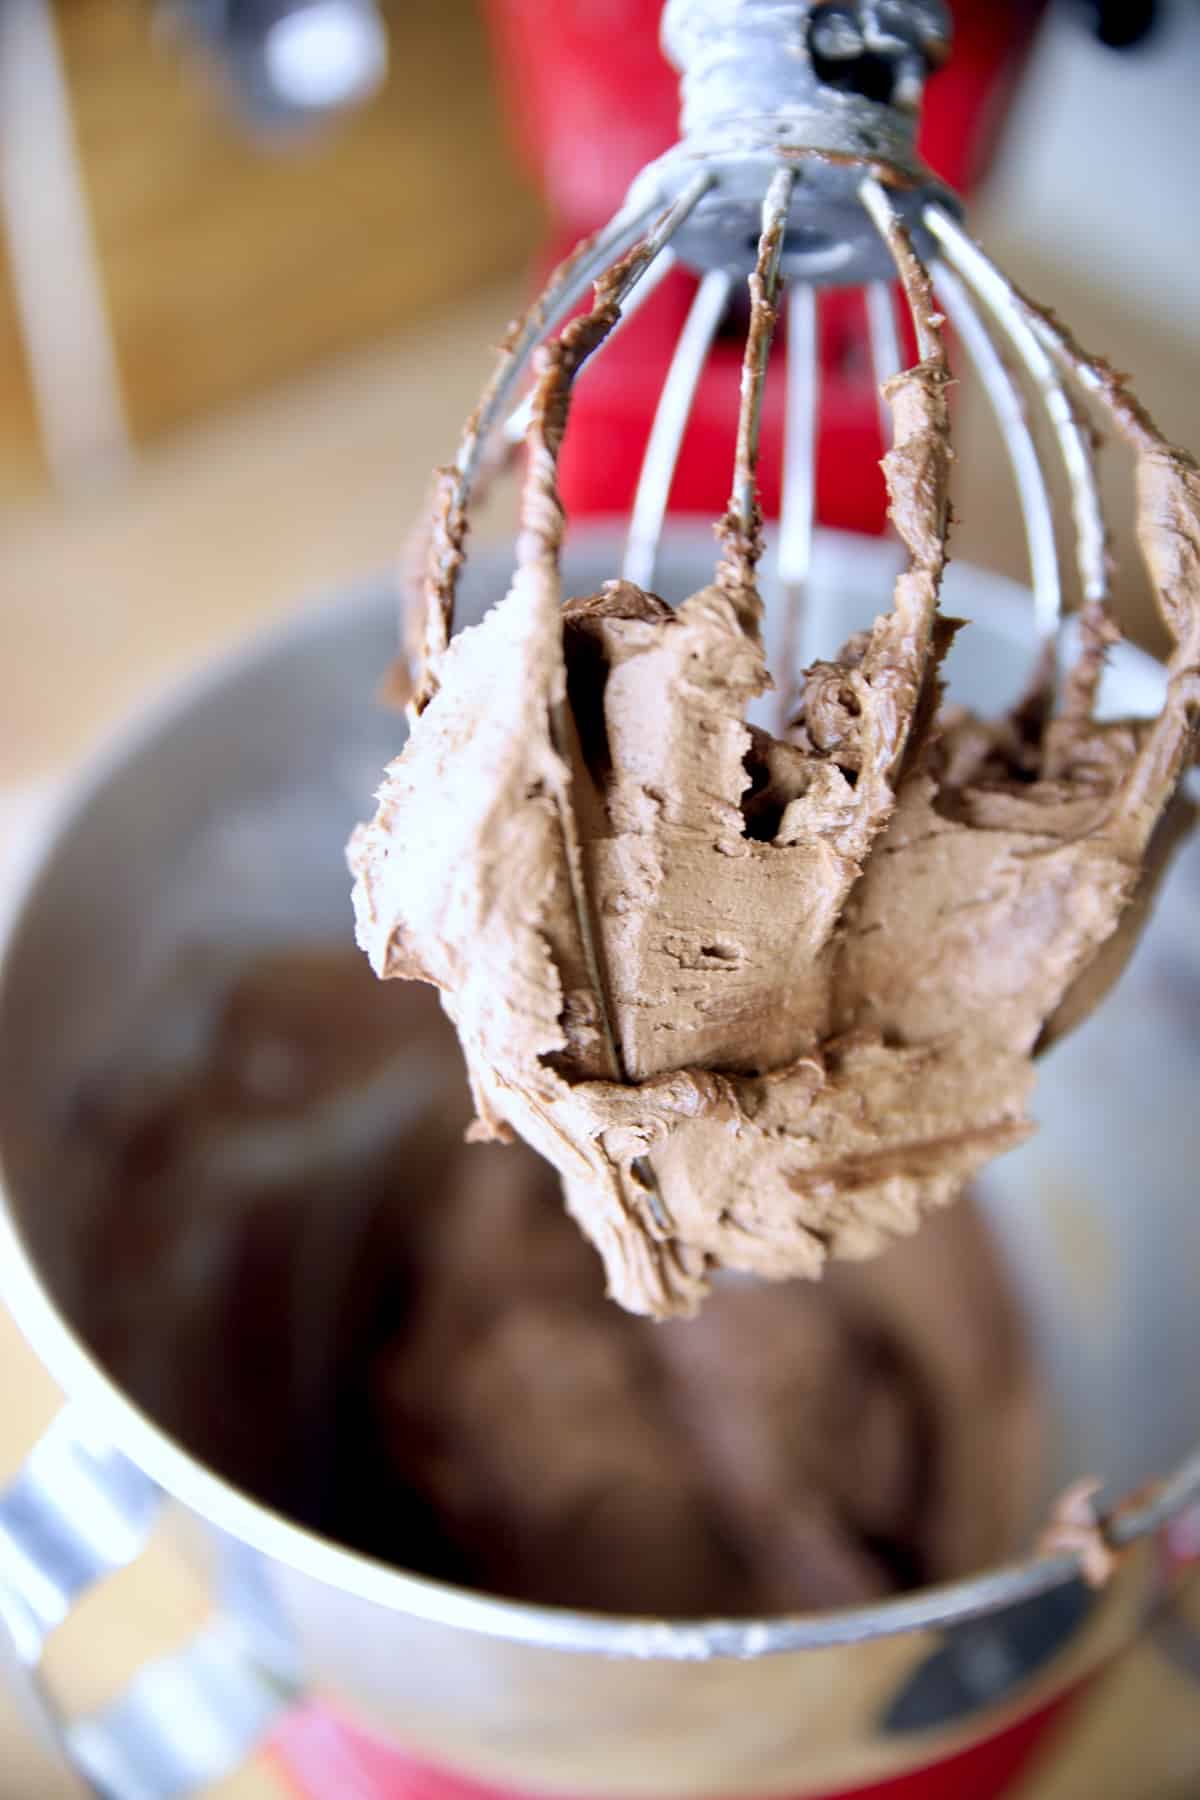 Chocolate buttercream on mixer whisk.